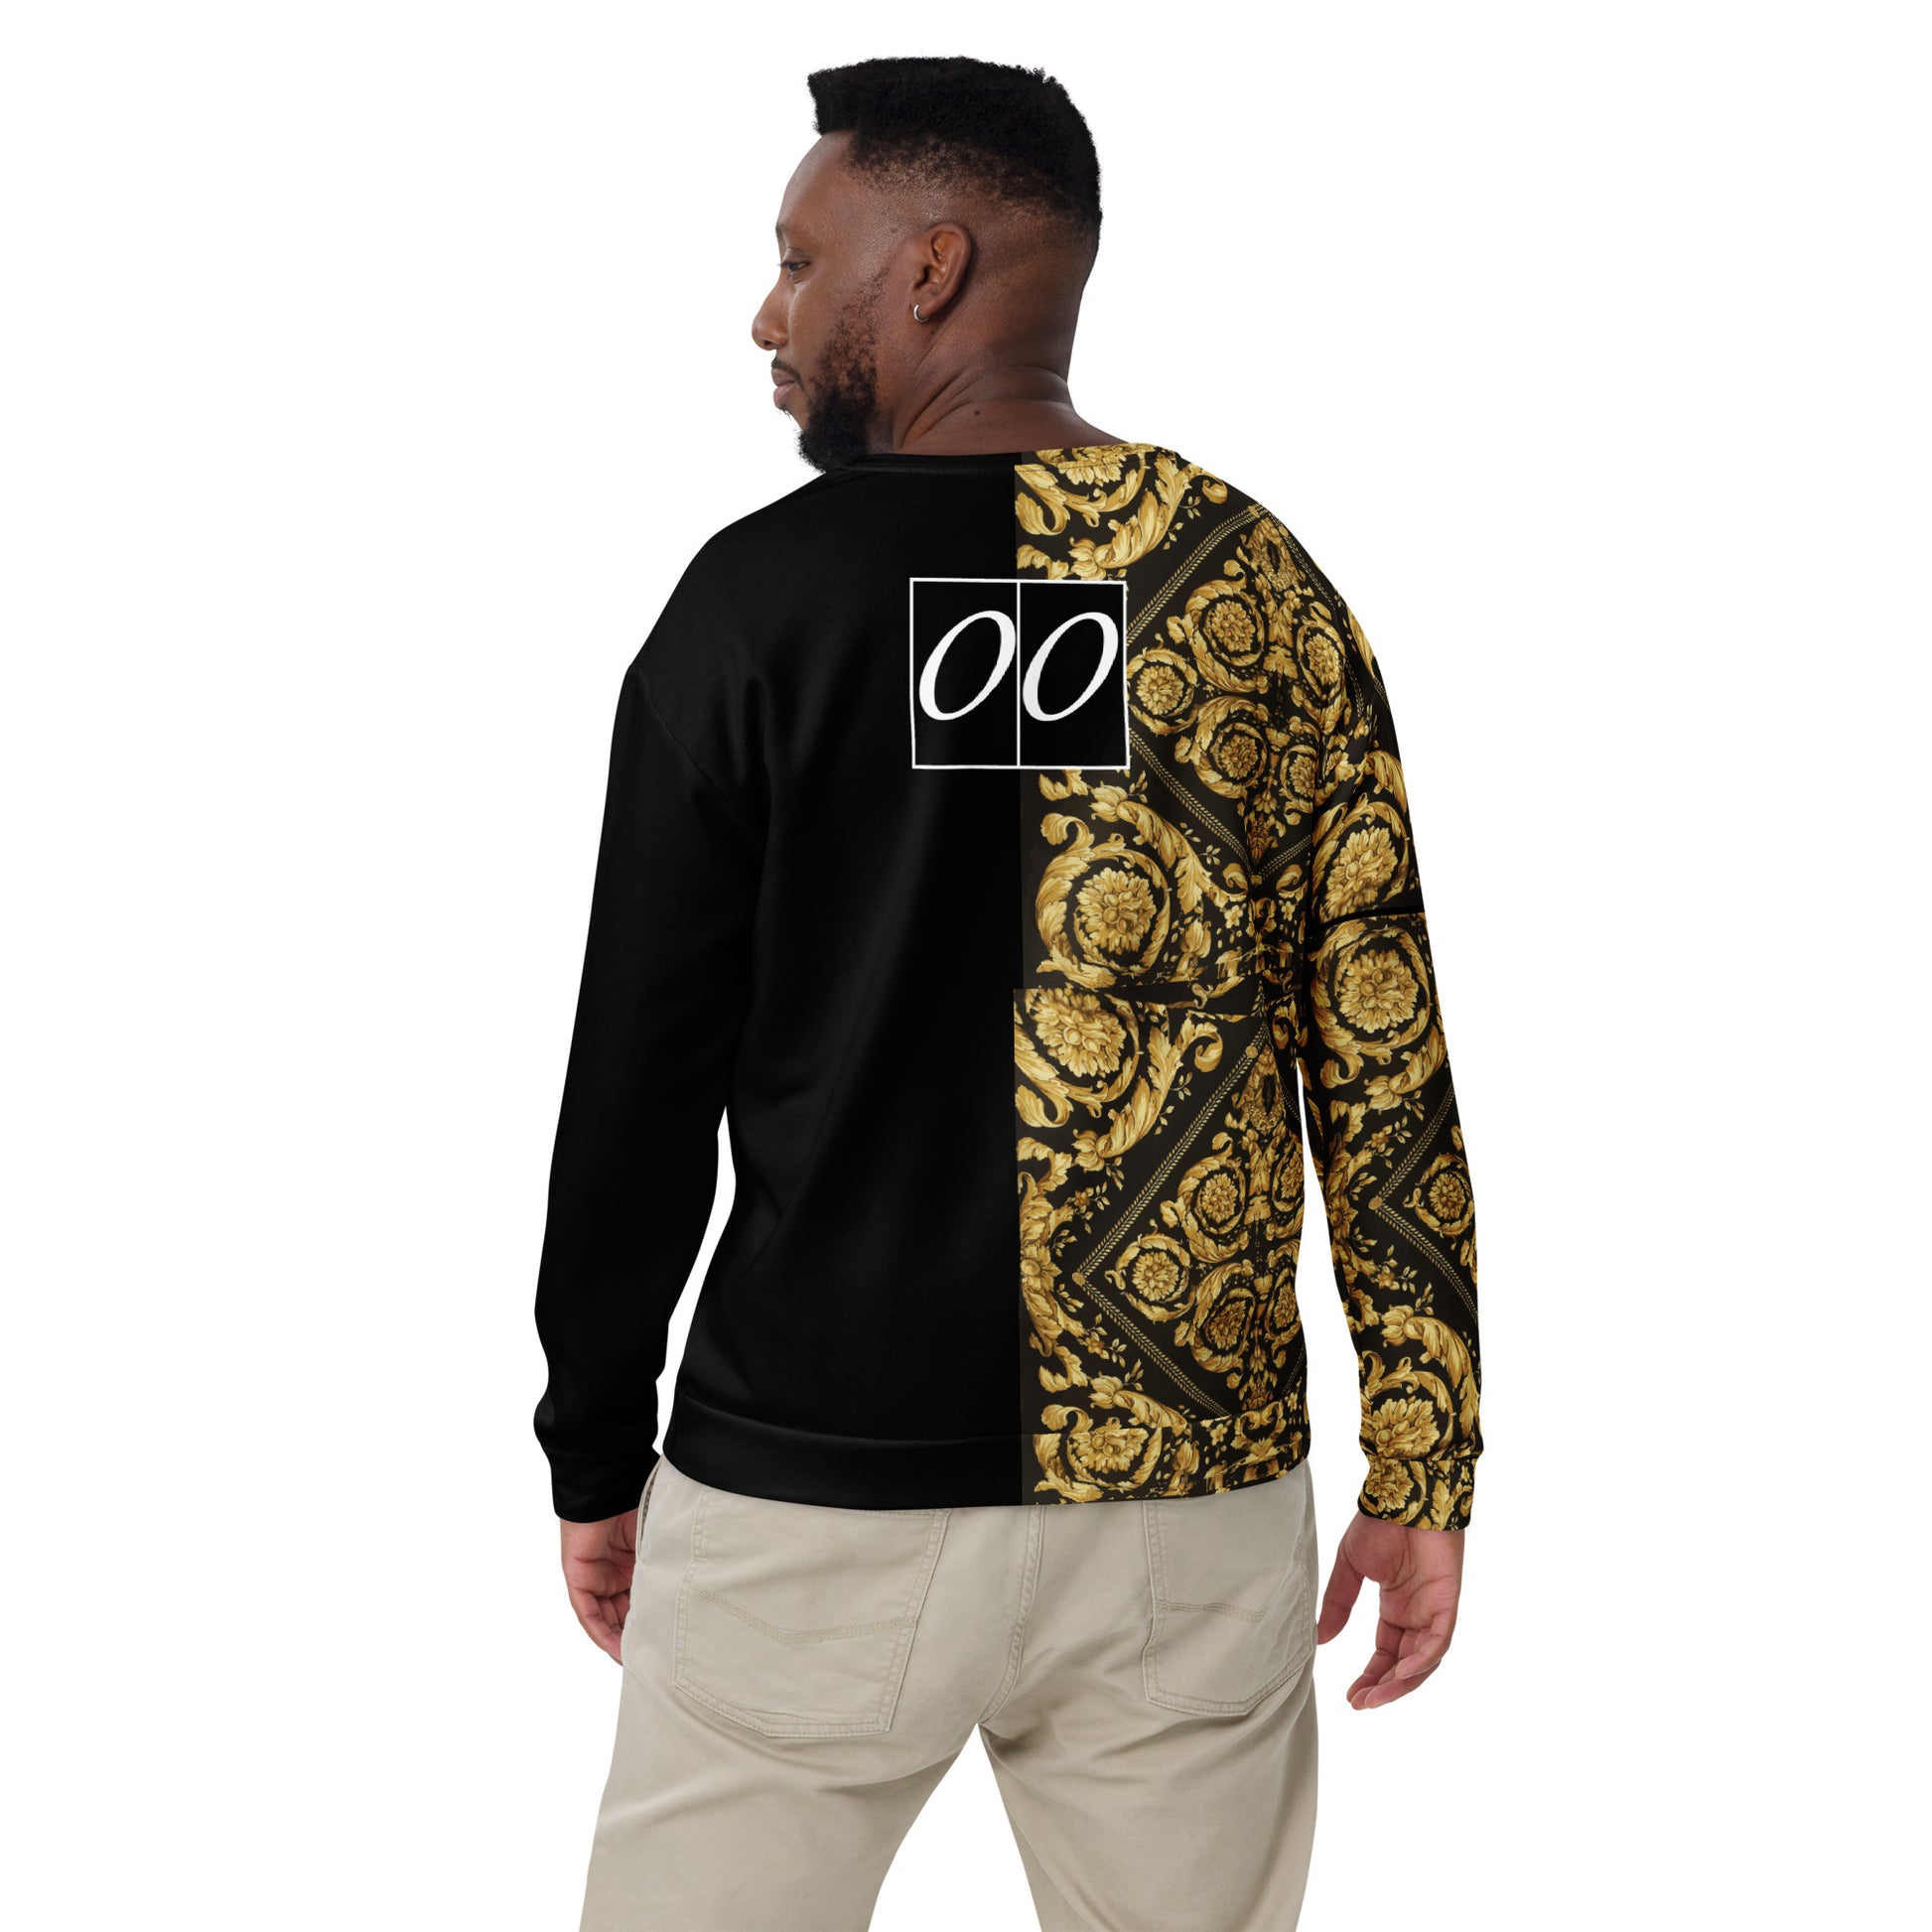 Real Life black and gold baroque team Unisex Sweatshirt - HipHatter